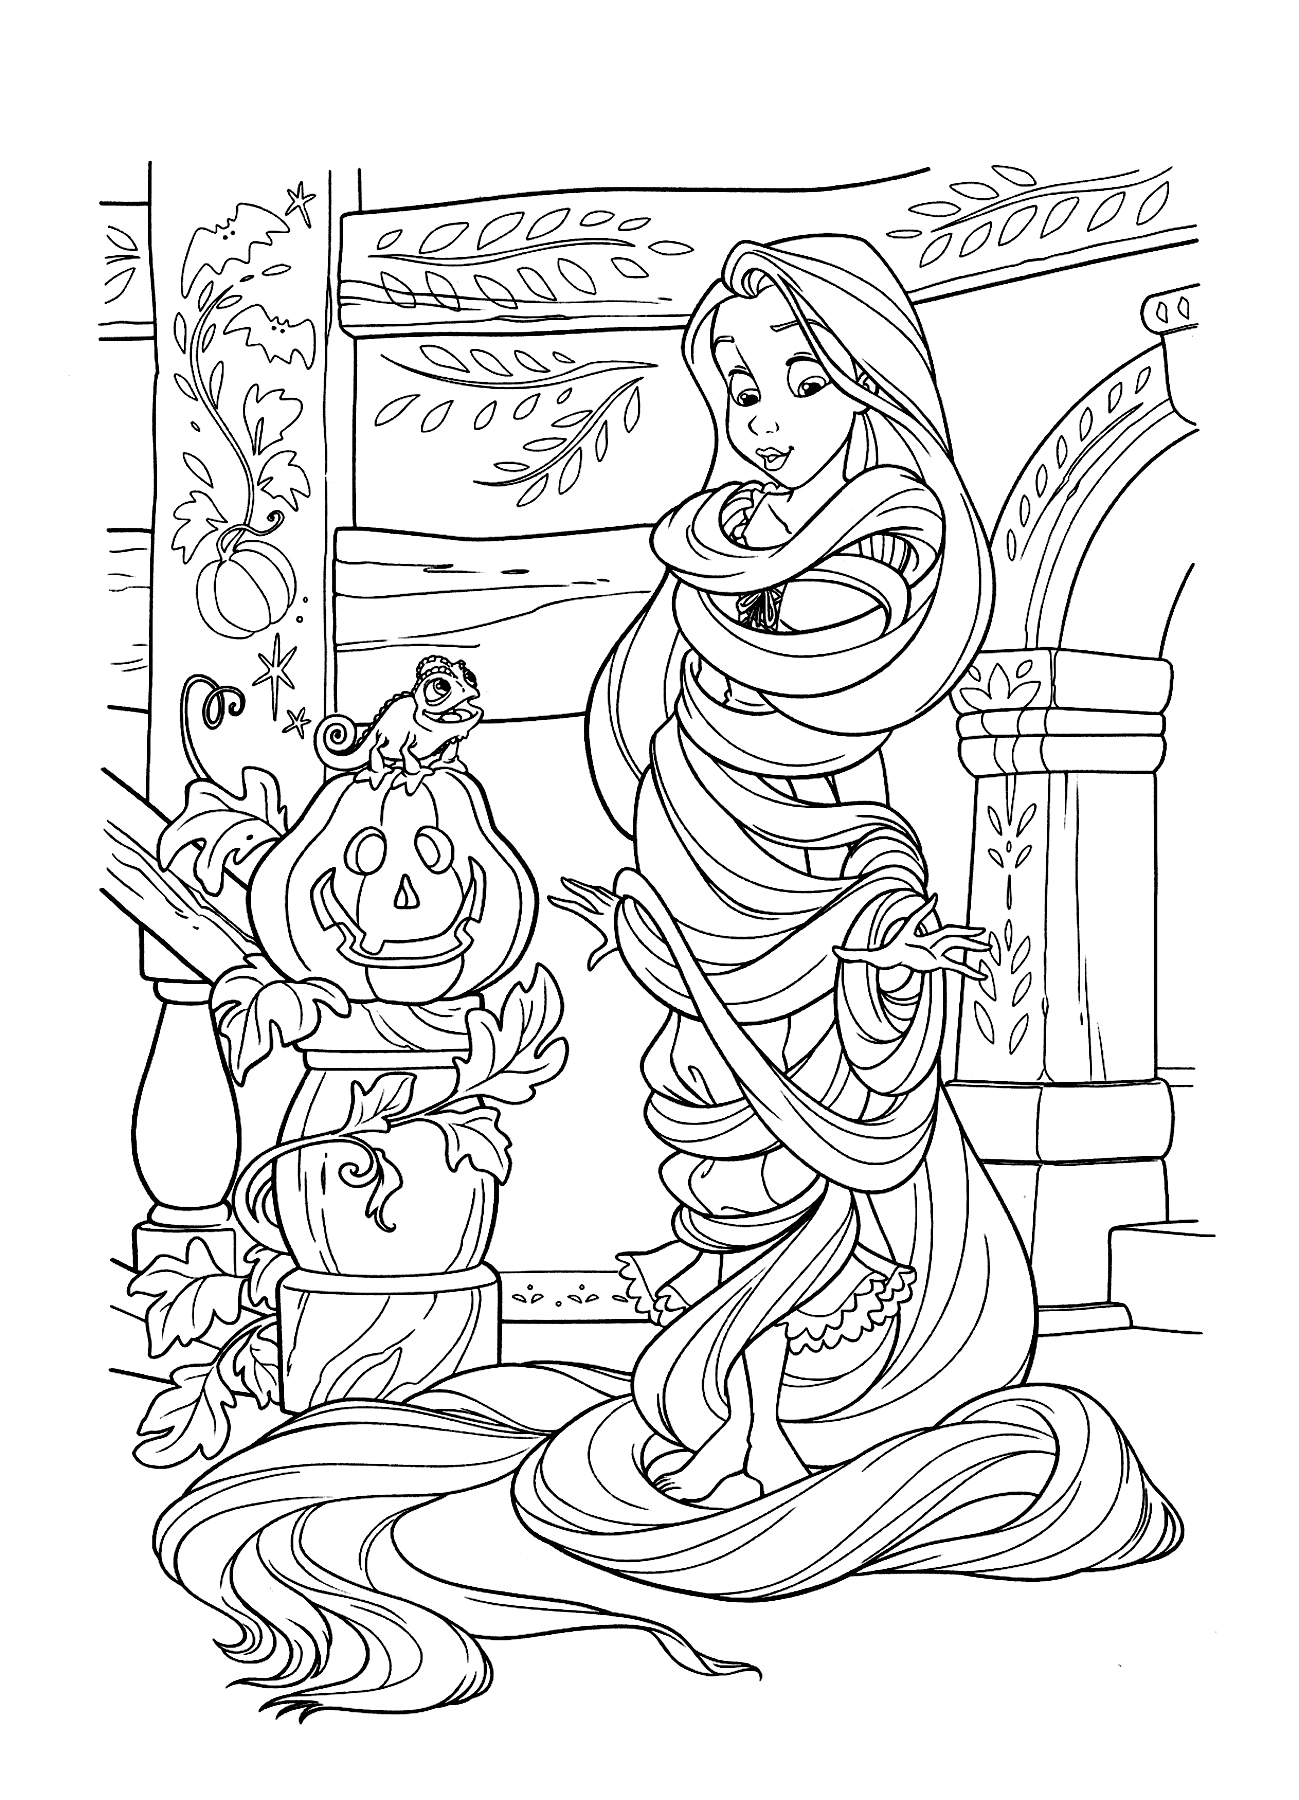 Rapunzel Is Tied By Her Long Hair Coloring Pages